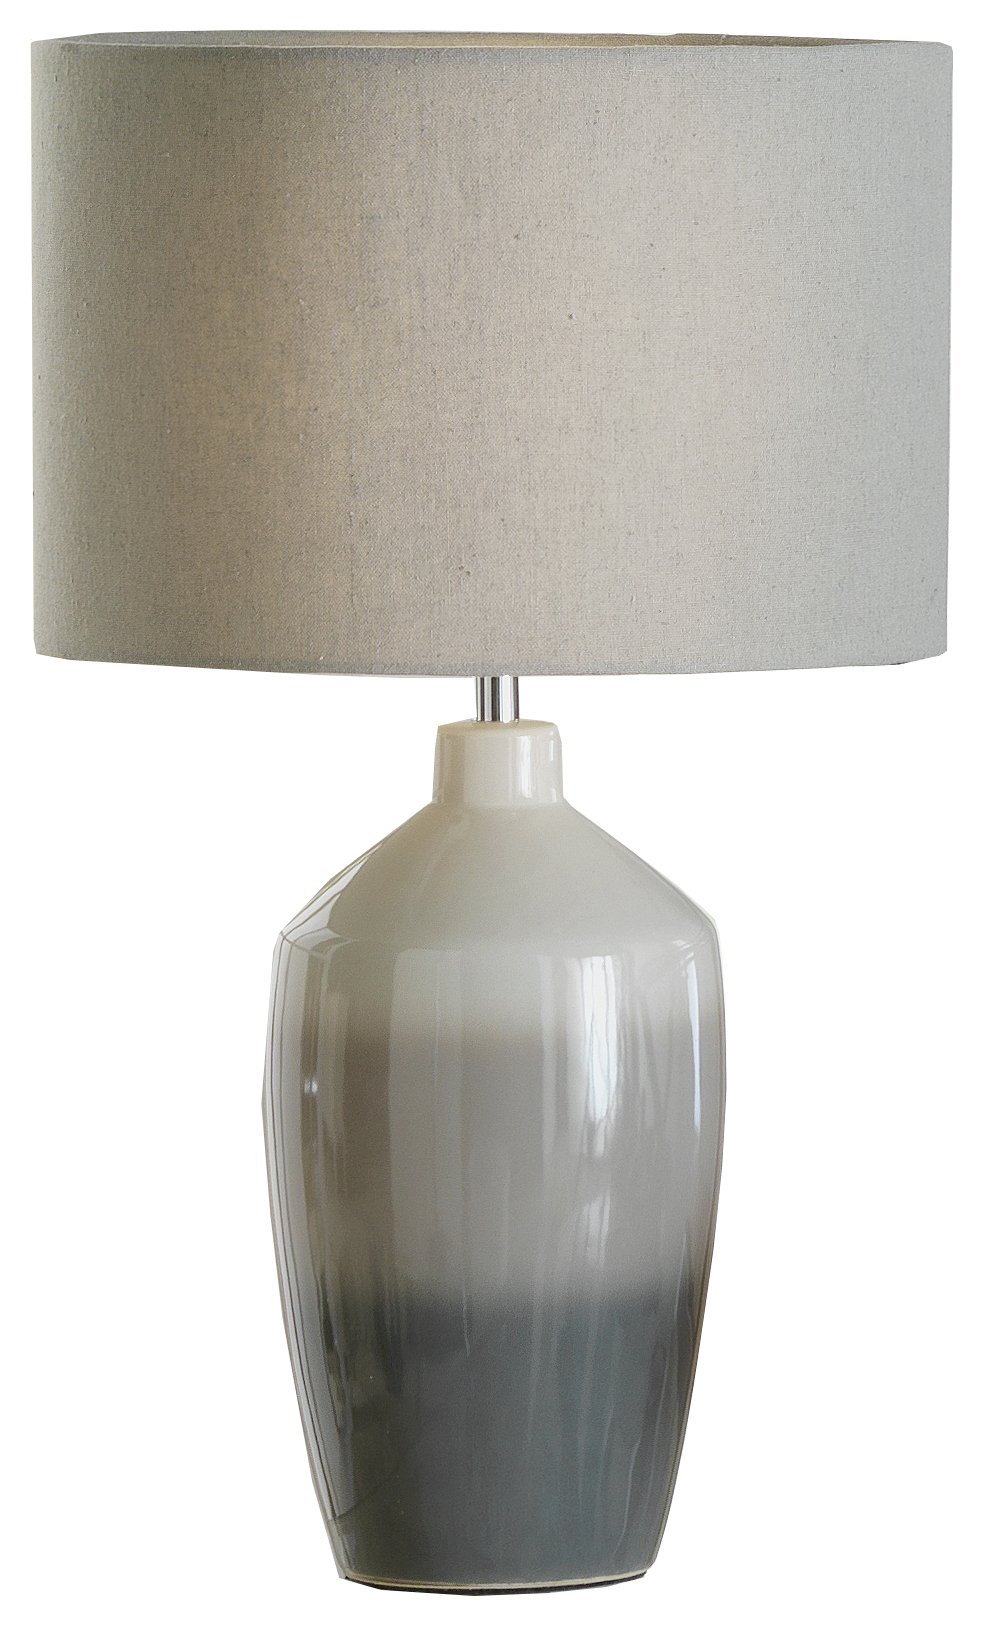 Argos Home Woodley Ombre Ceramic Table Lamp - Grey